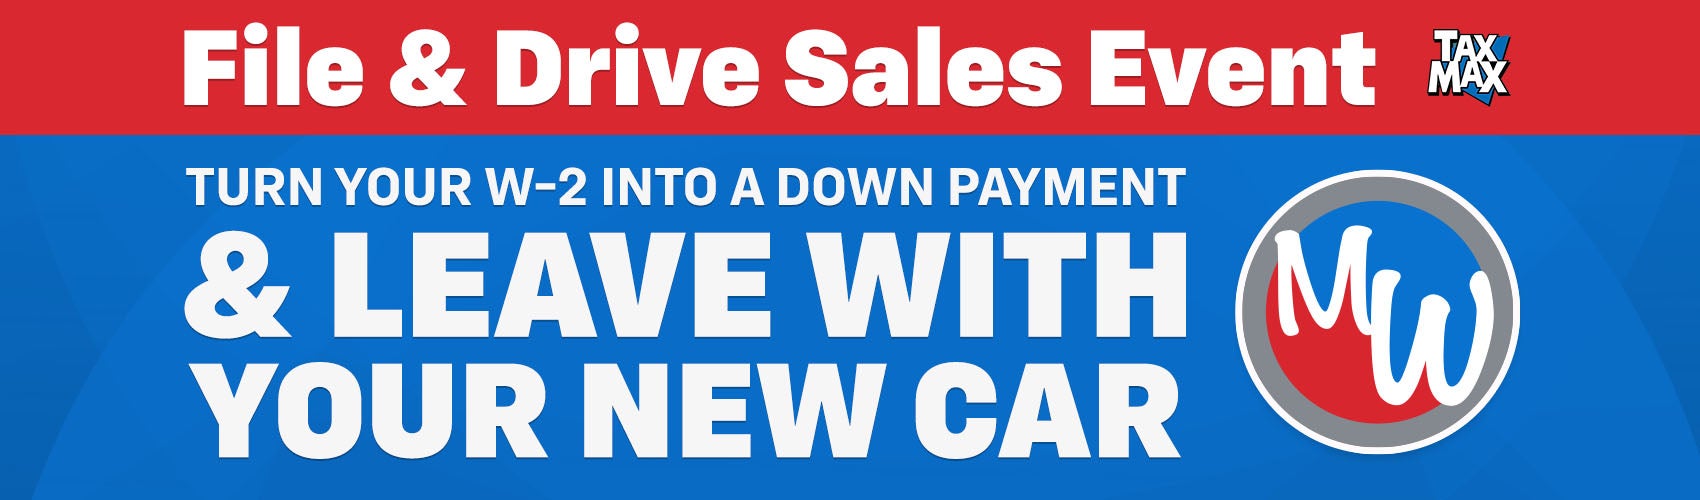 File and Drive Sales Event